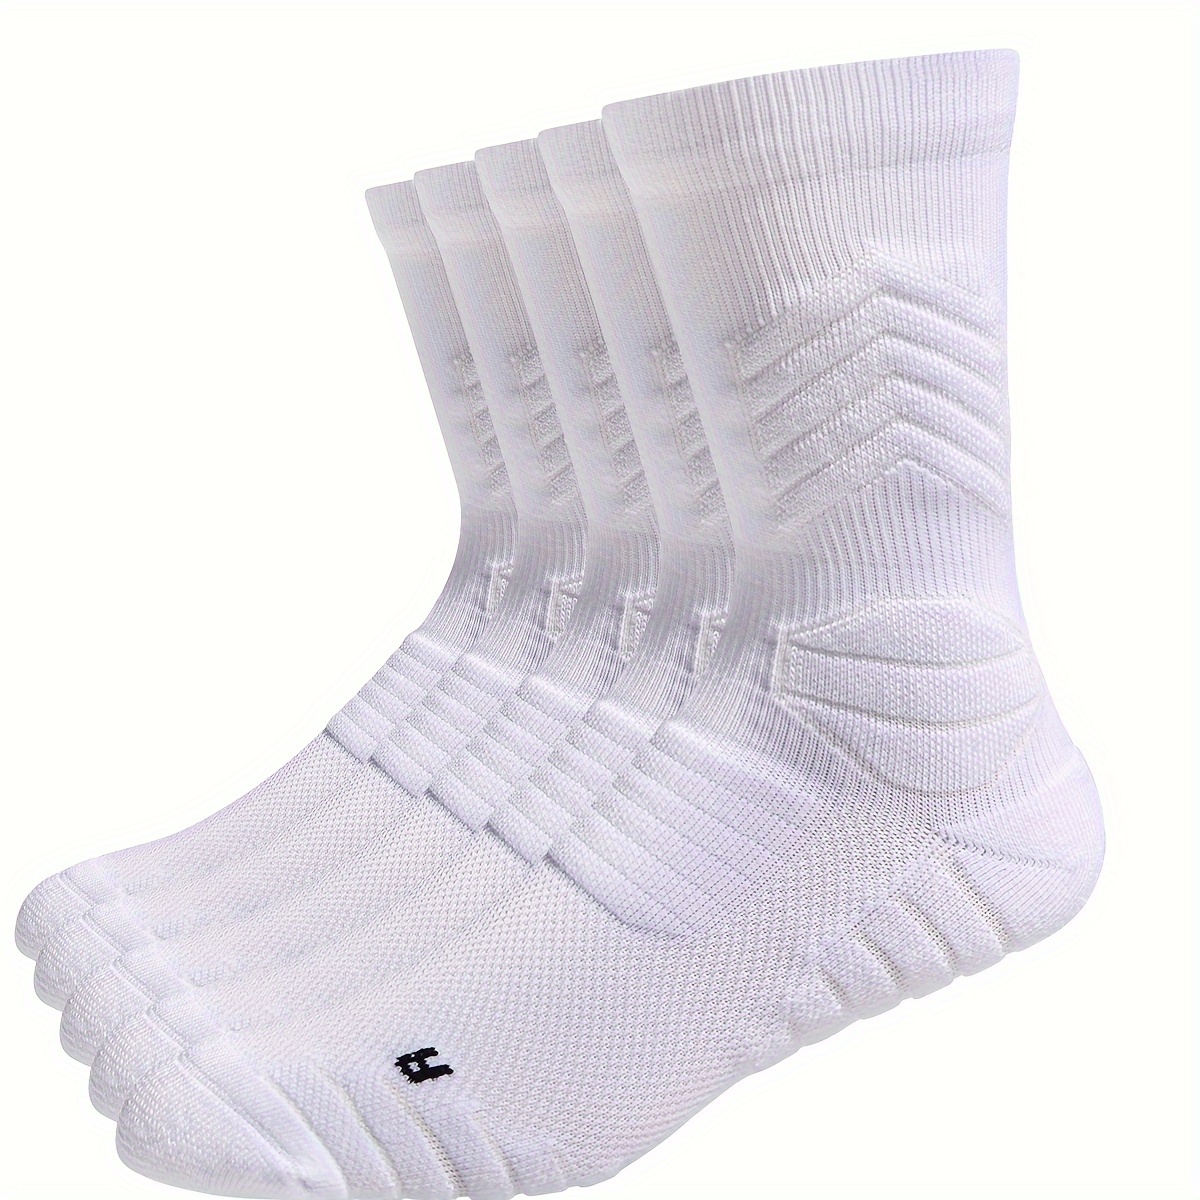 

5 Pairs Of Men's Anti Odor & Sweat Absorption Crew Socks, Comfy & Breathable, Elastic Sport Basketball Socks For Men's Outdoor Activities